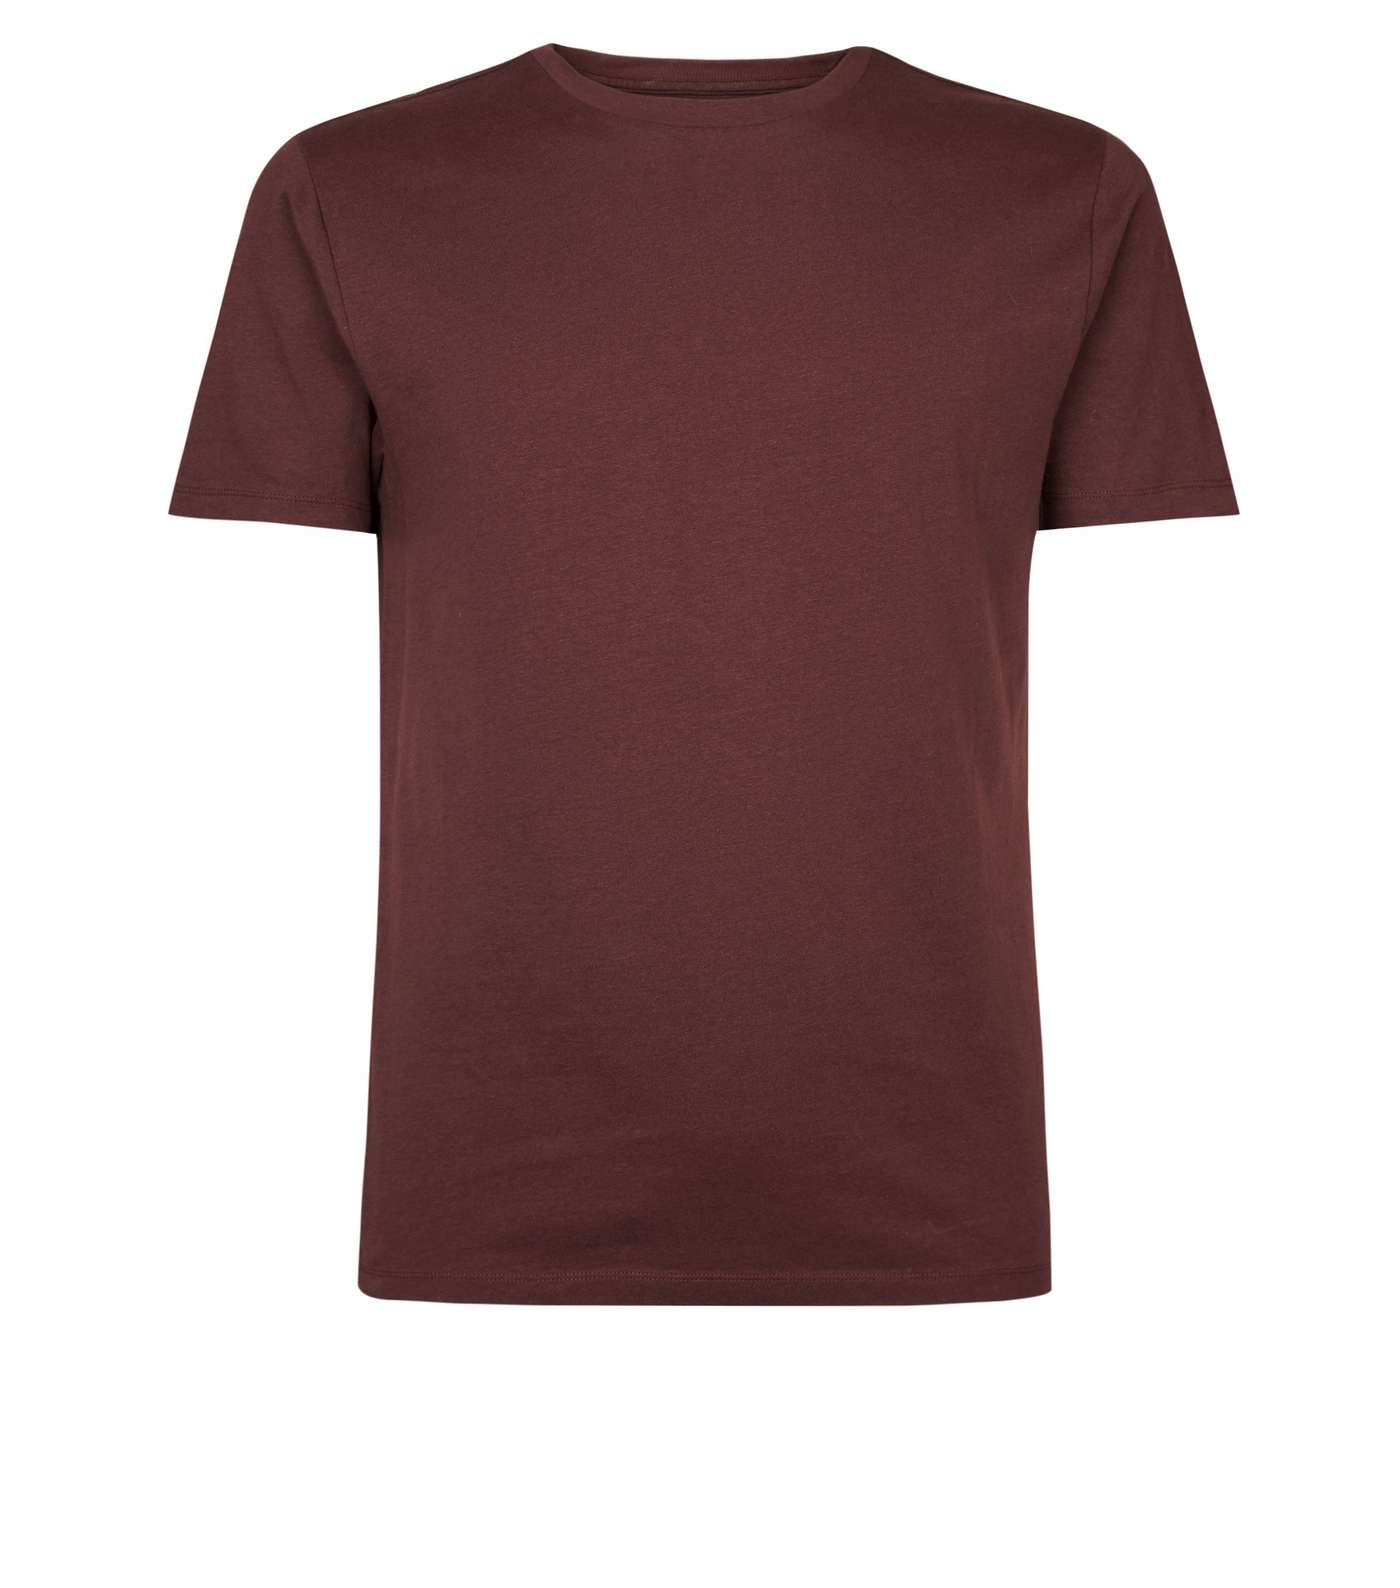 Burgundy Short Sleeve Muscle Fit T-Shirt Image 4